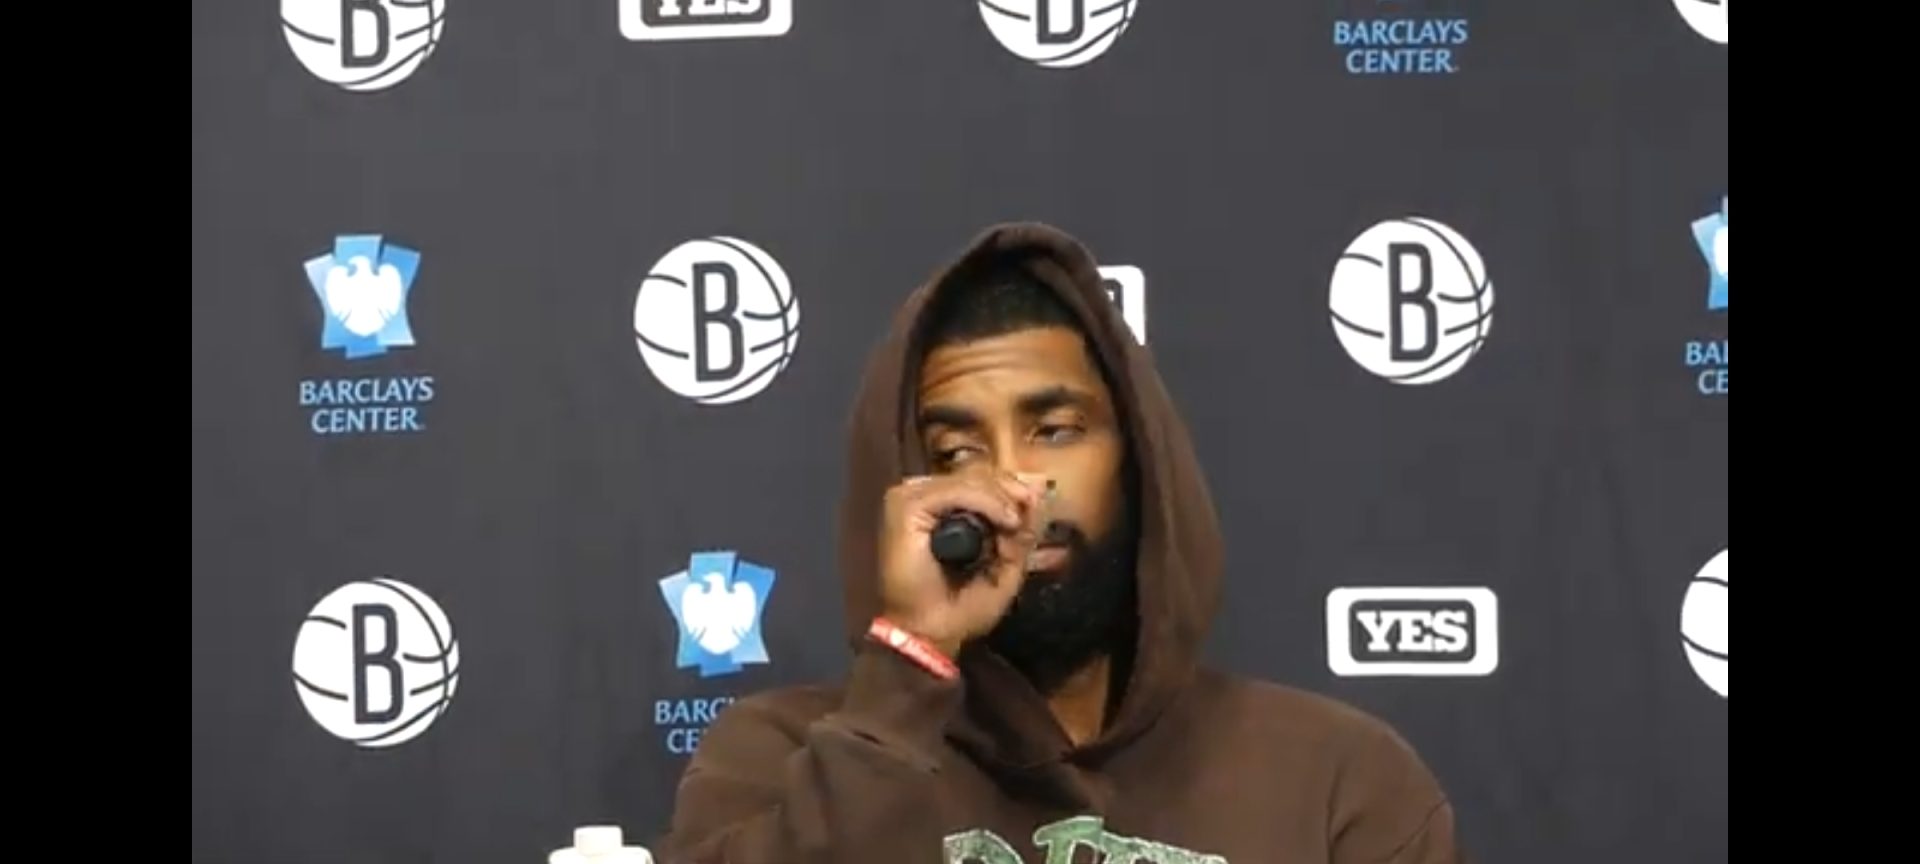 Kyrie Irving speaks with the media after a Brooklyn Nets game at Barclays Center in Brooklyn, New York. (Photo by Derrel Jazz Johnson for rolling out)